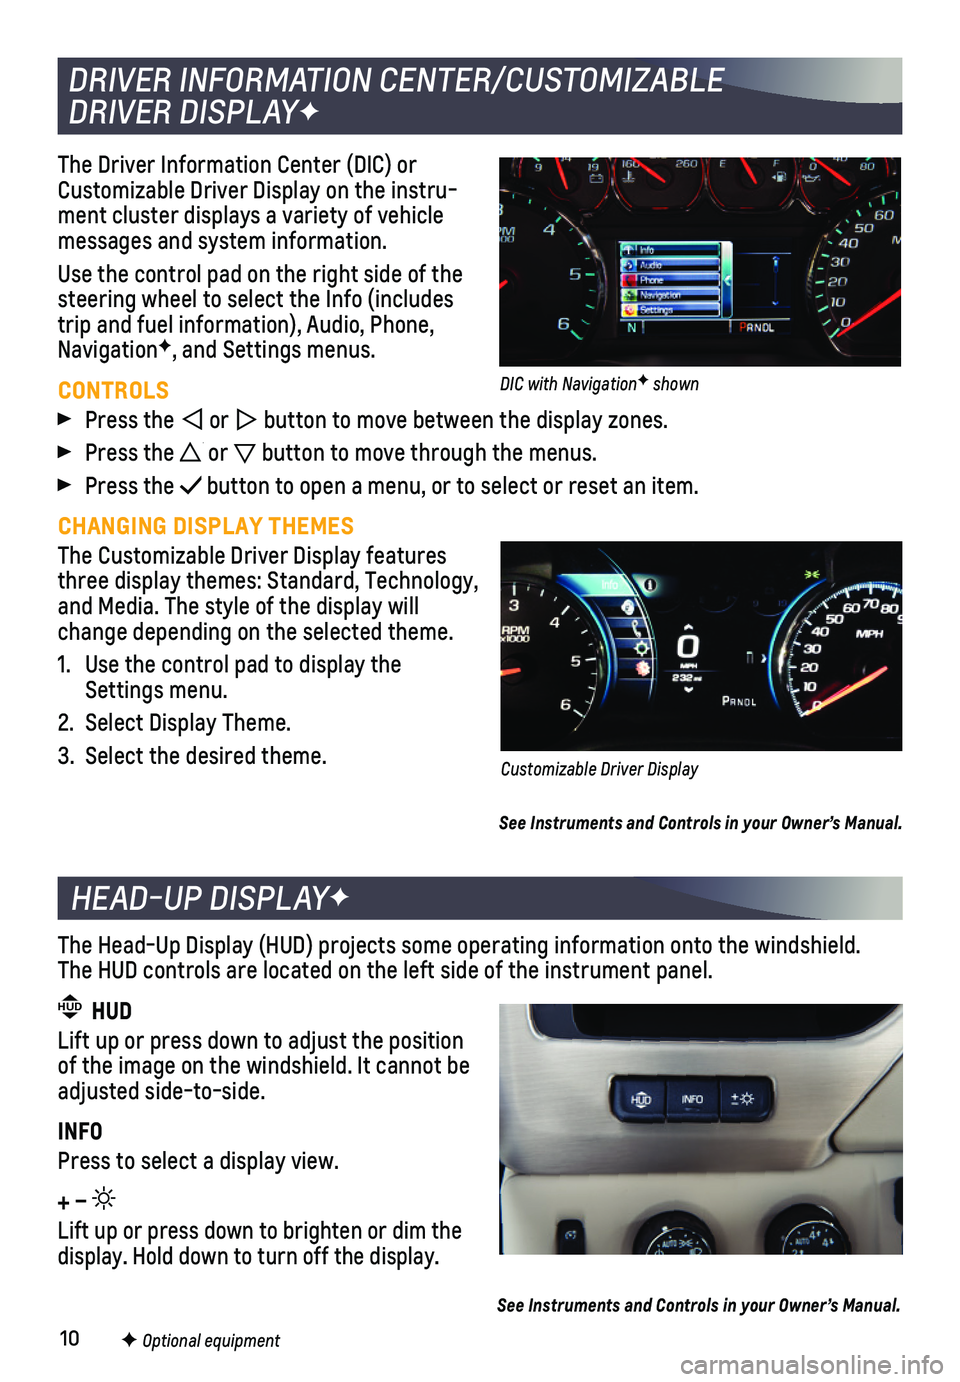 CHEVROLET TAHOE 2019  Get To Know Guide 10
The Driver Information Center (DIC) or Customizable Driver Display on the instru-ment cluster displays a variety of vehicle messages and system information.
Use the control pad on the right side of